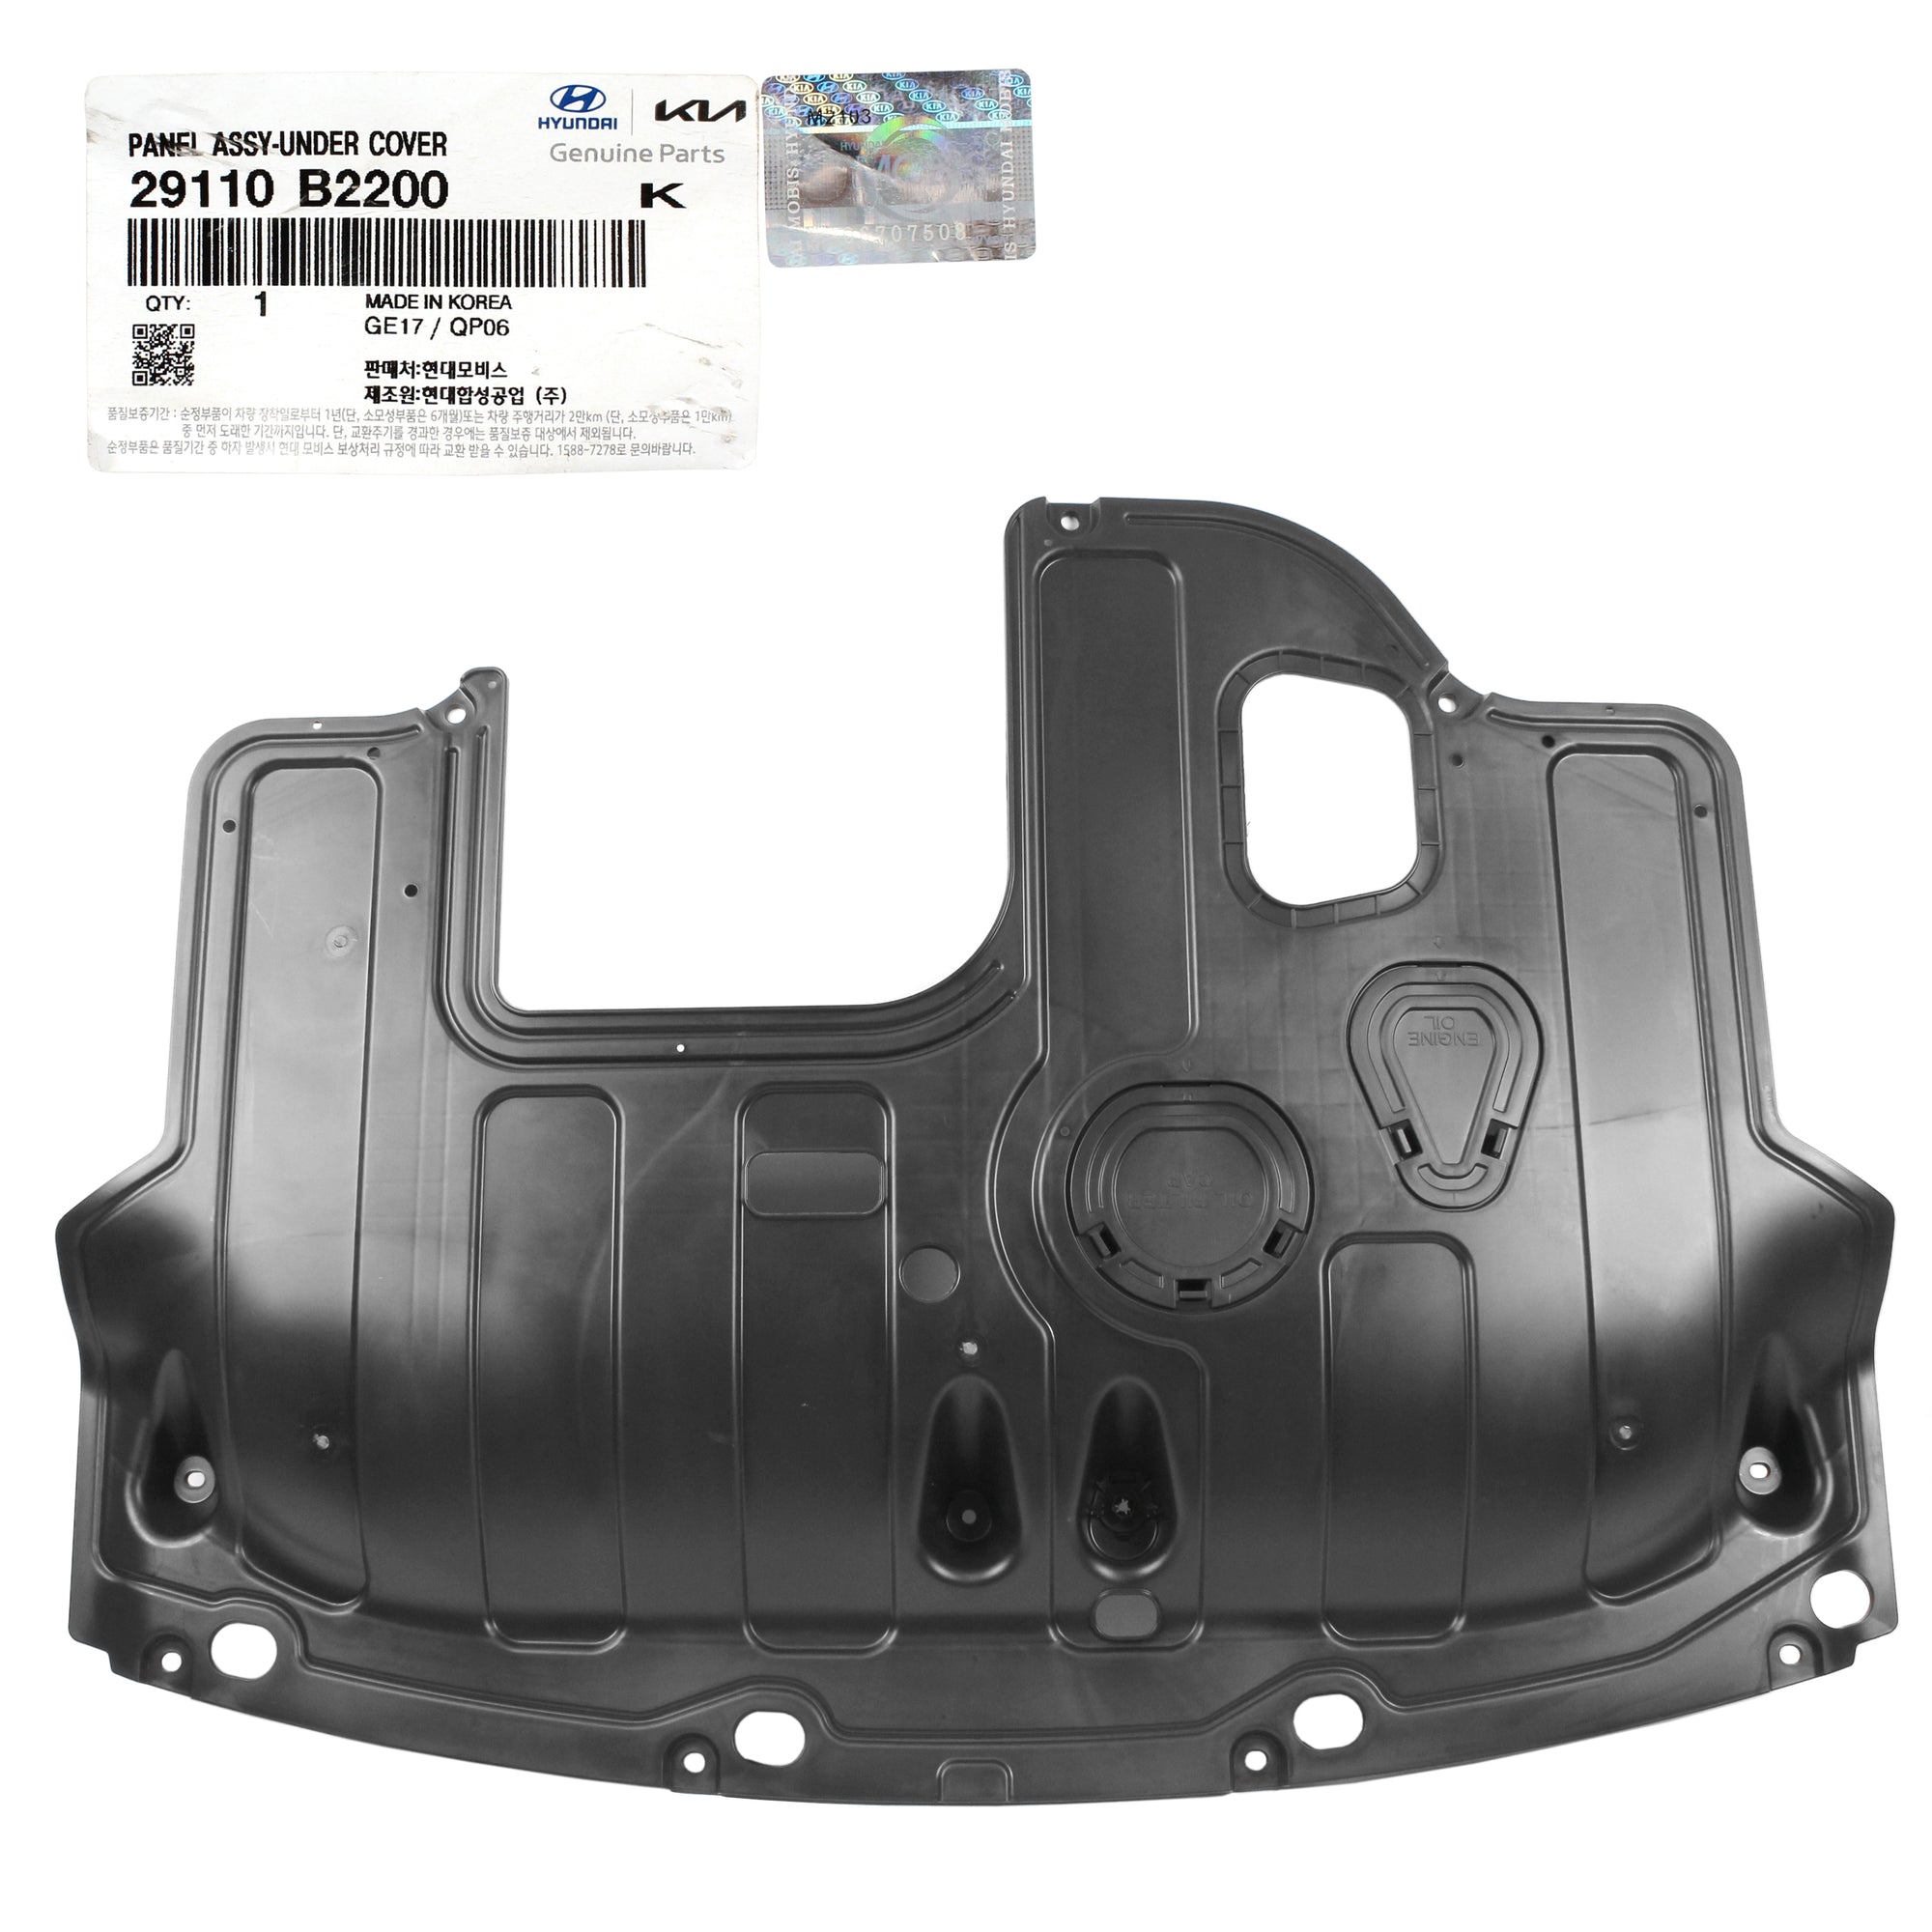 GENUINE Engine Under Cover Panel for 2014-2019 Kia Soul 29110B2200